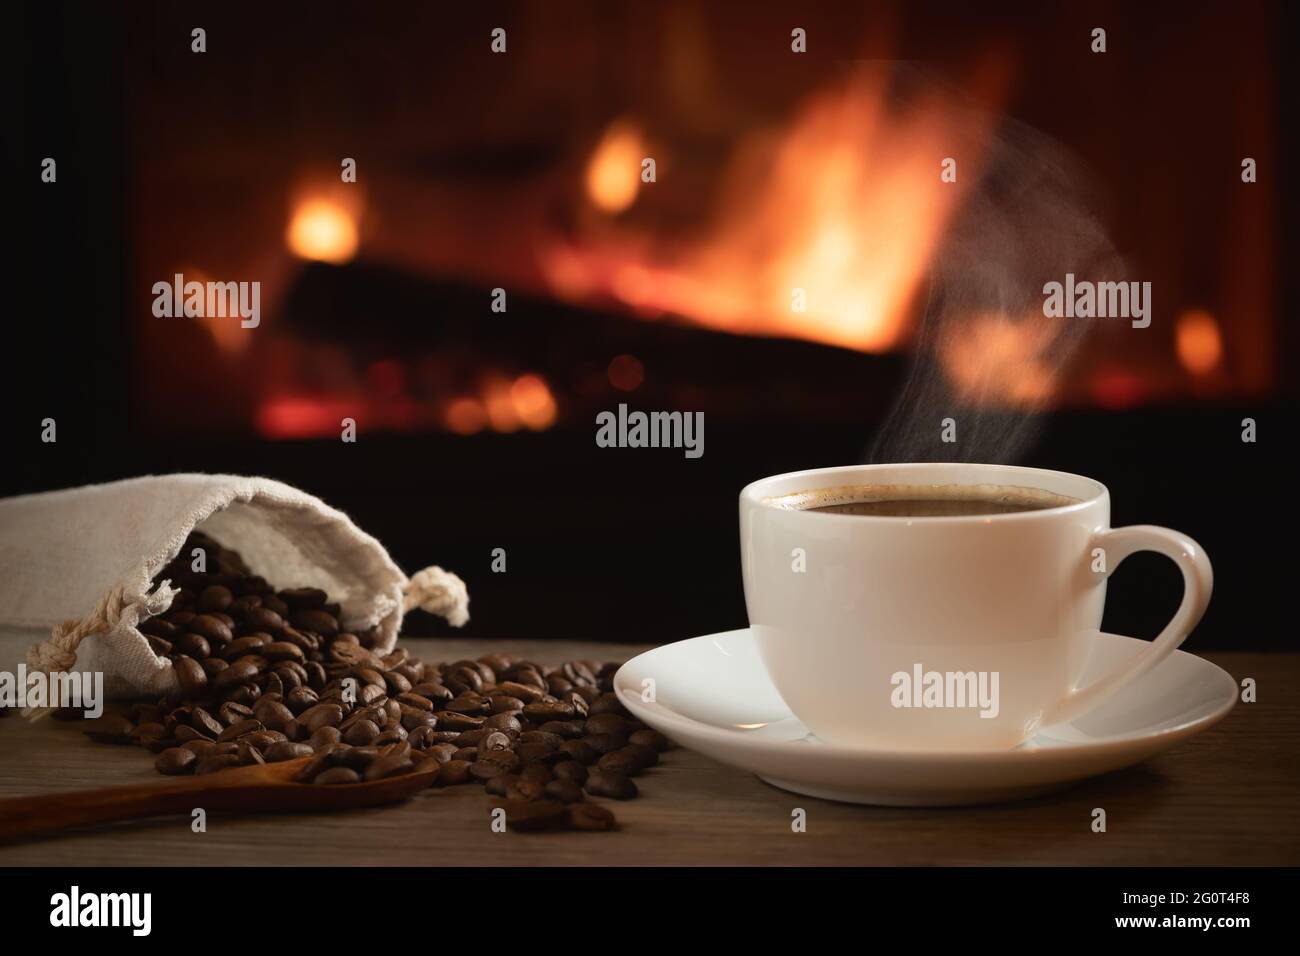 https://c8.alamy.com/comp/2G0T4F8/cup-of-hot-coffee-and-coffee-beans-in-a-bag-on-a-wooden-table-in-front-of-a-burning-fireplace-selective-focus-2G0T4F8.jpg